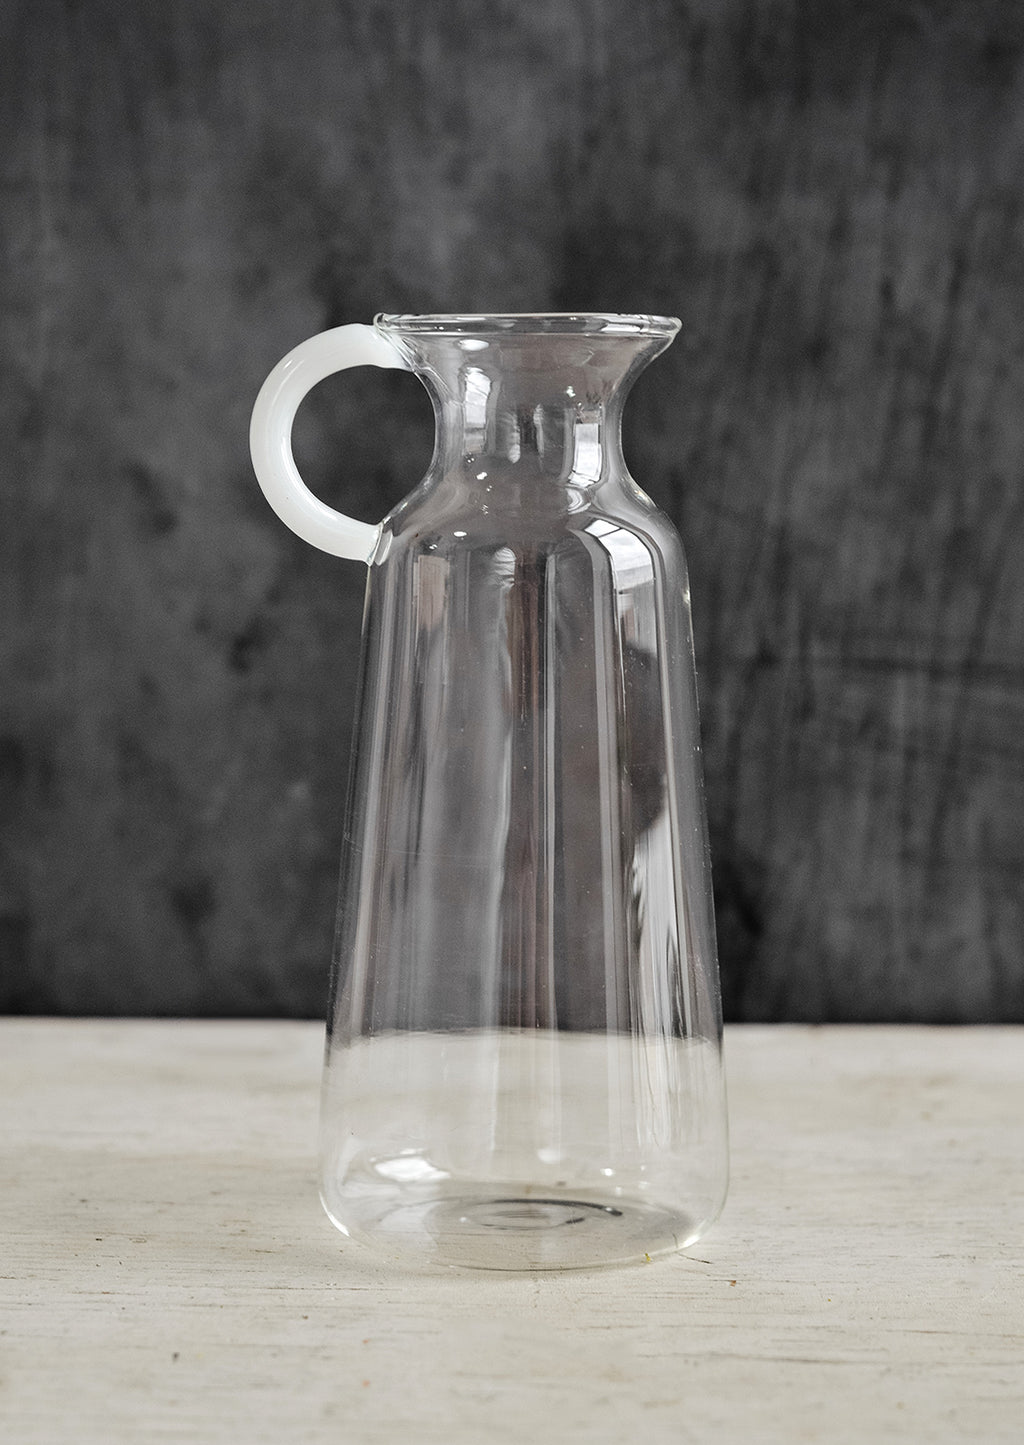 Medium: A clear glass vase in milk bottle shape with white handle at one side.